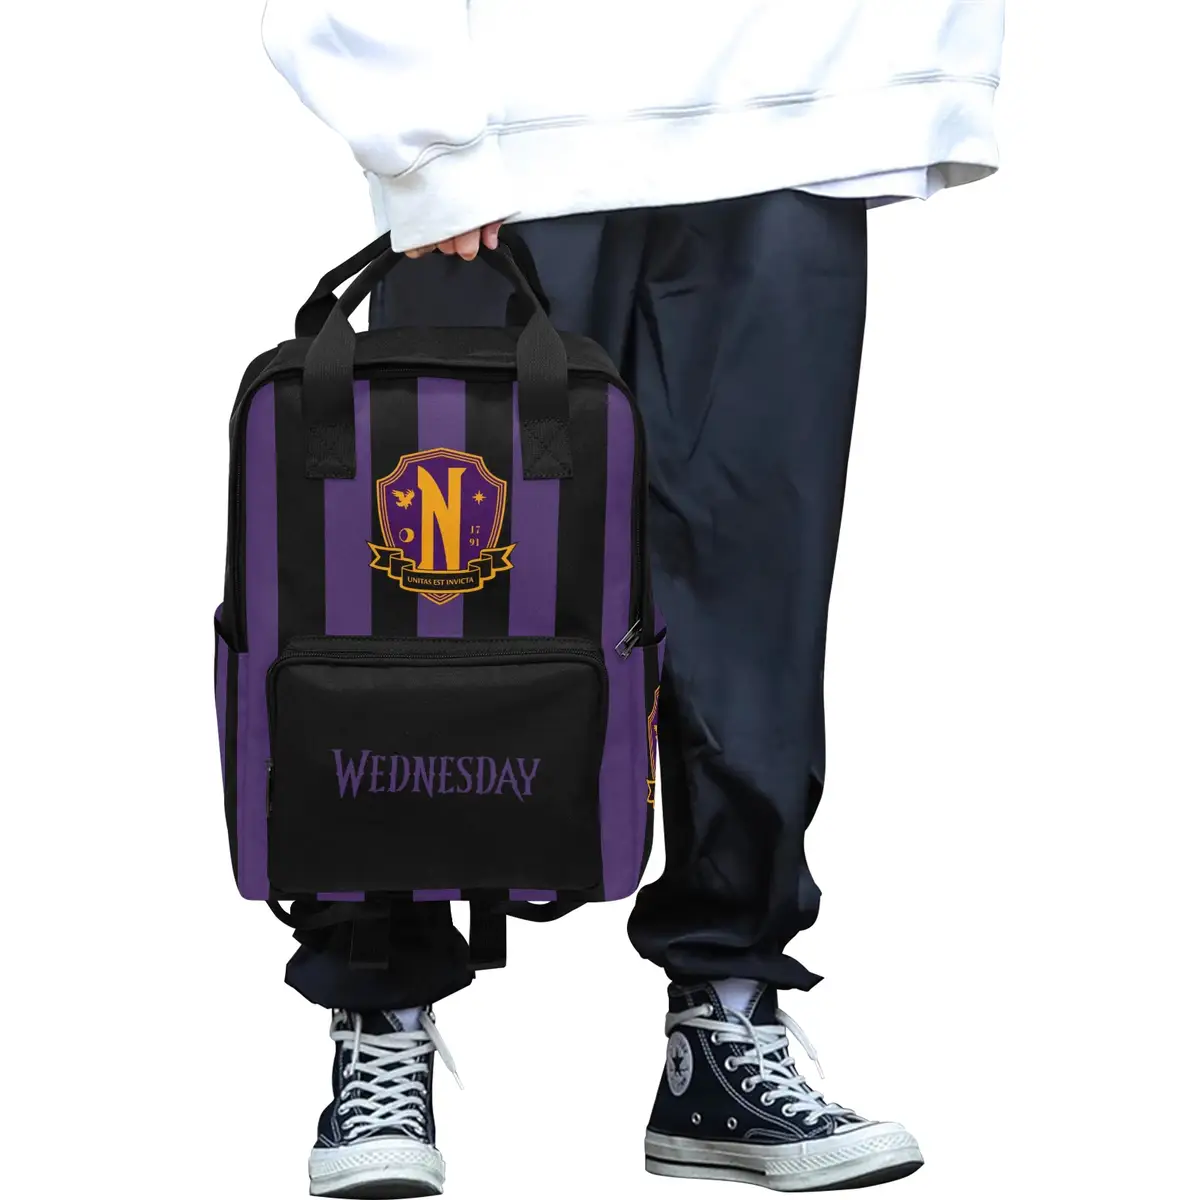 Wednesday Addams Uniform Inspired Black and Purple Backpack, Youth Book Bag for School, Nevermore Academy Rucksack Cool Kiddo 12